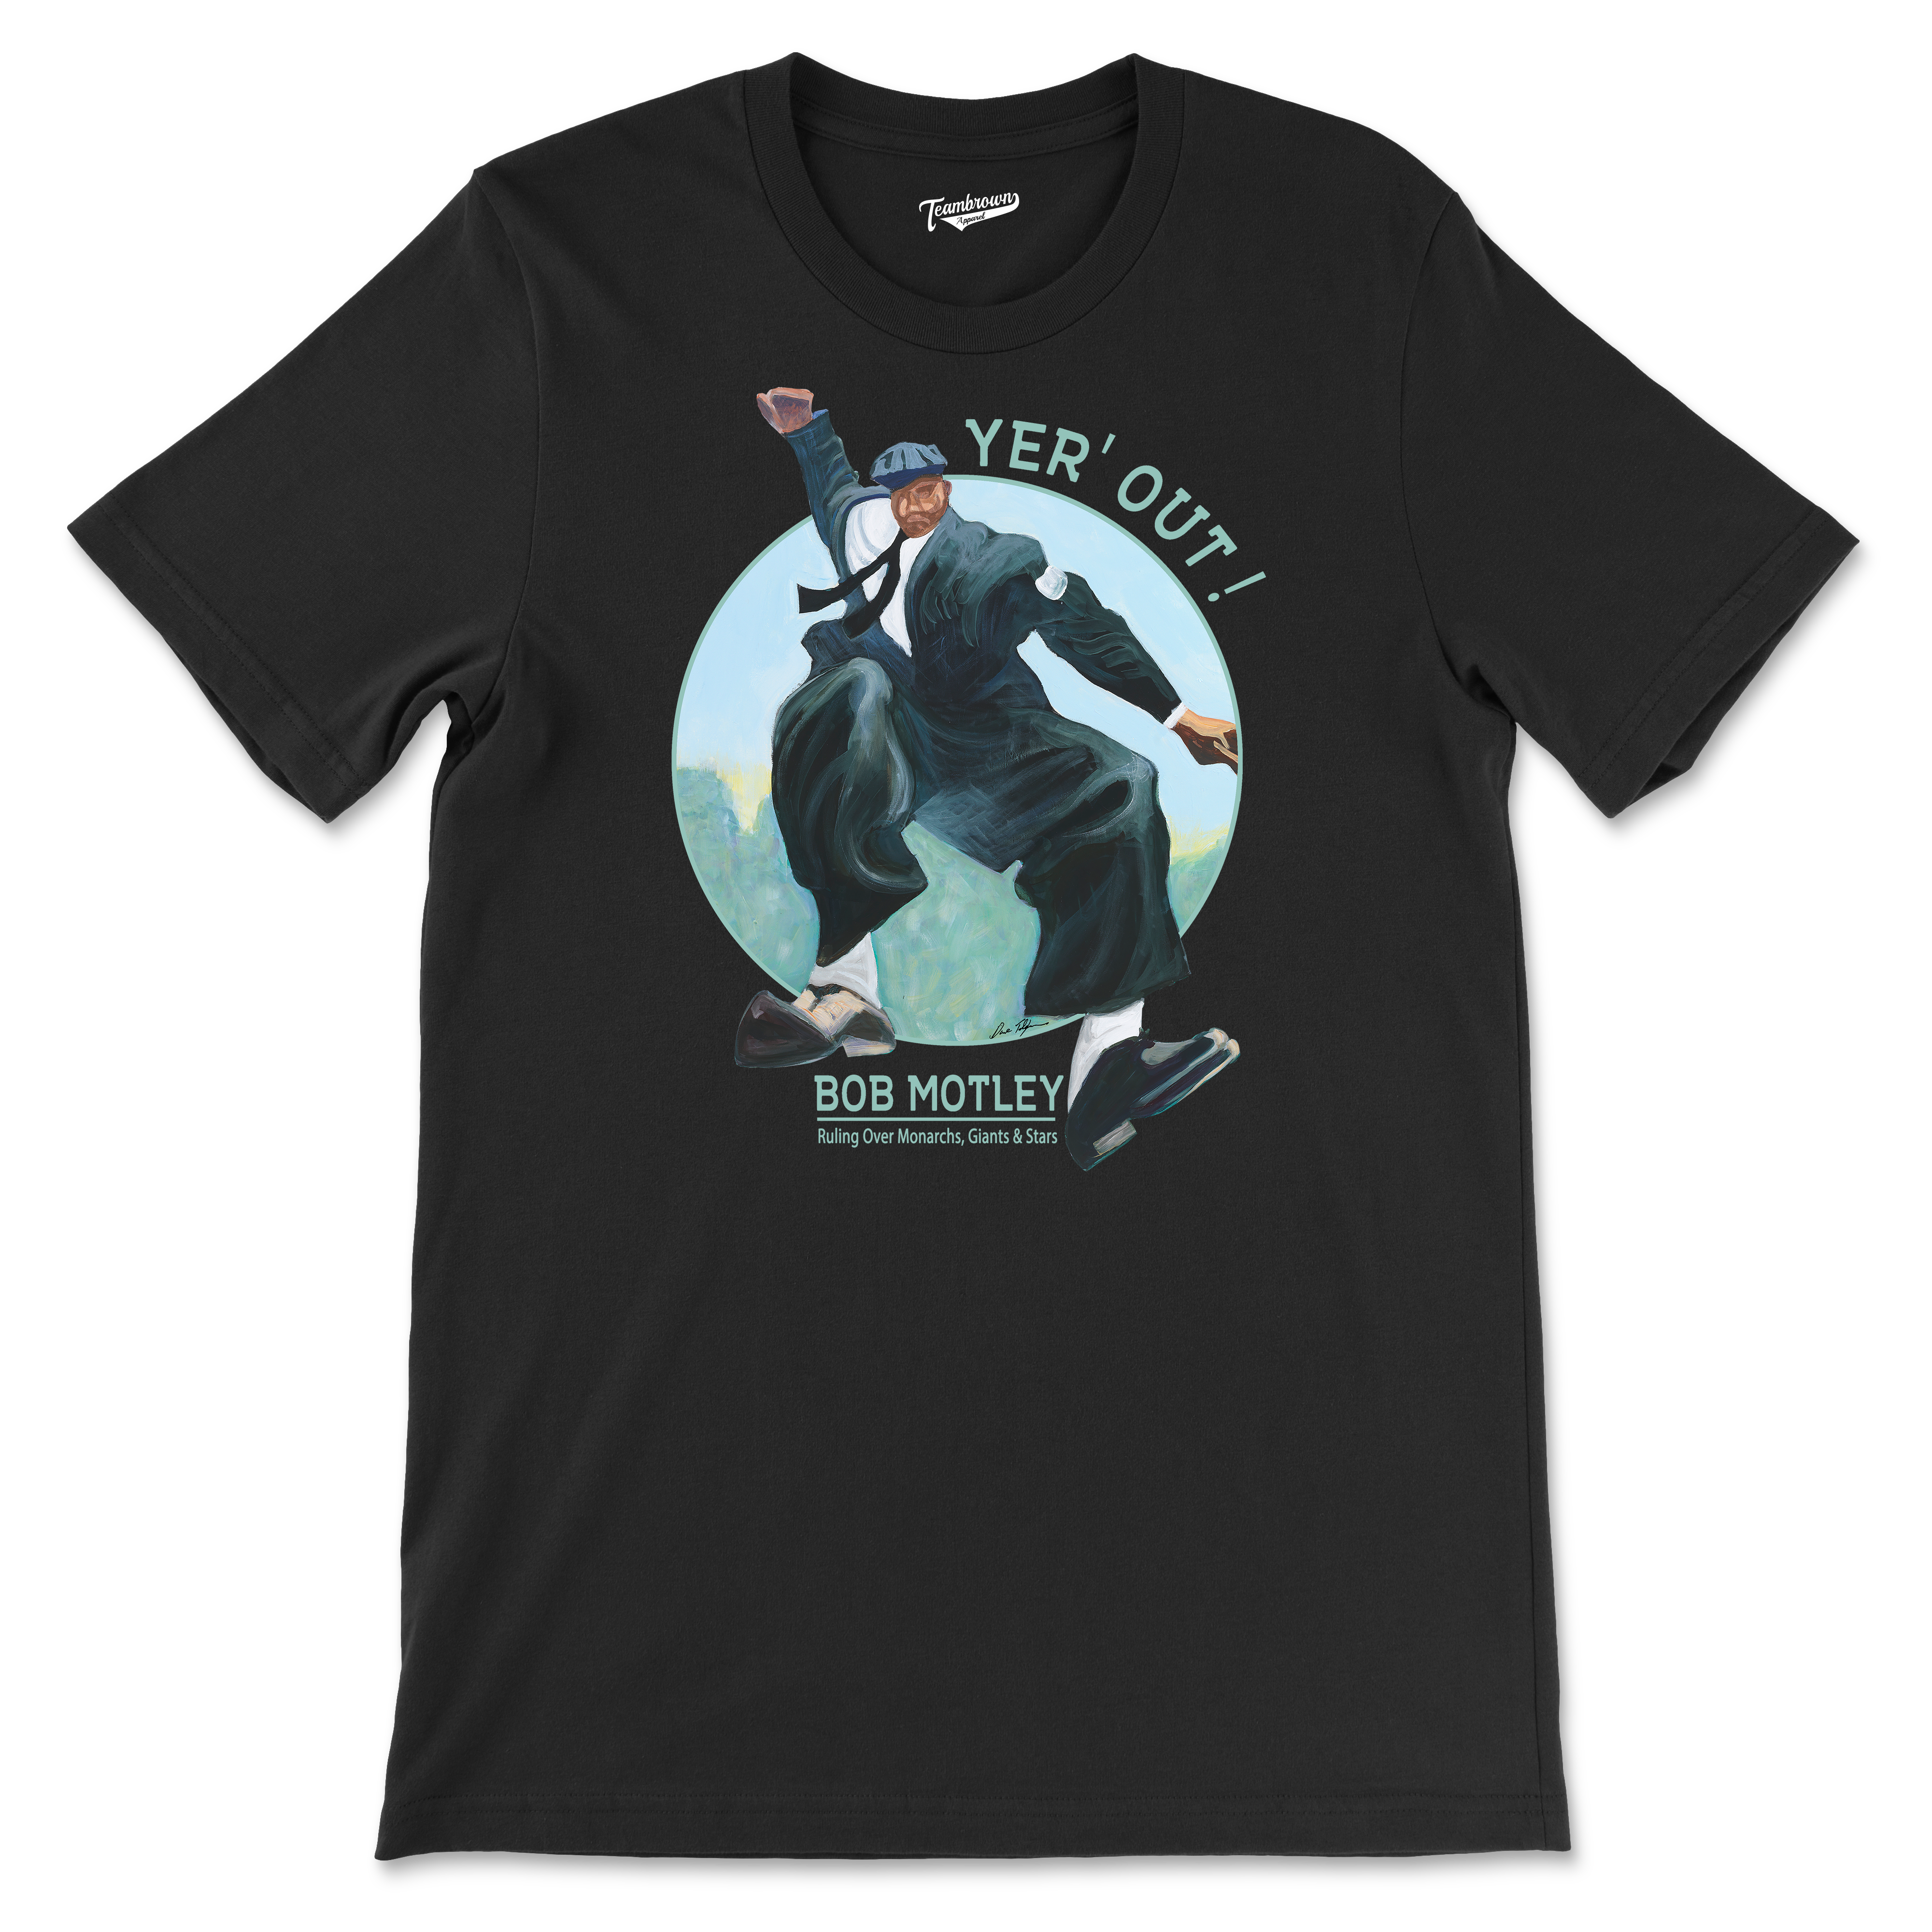 Bob Motley - Yer' Out! - Unisex T-Shirt | Officially Licensed - YABBA BIRI PRODUCTIONS, INC.